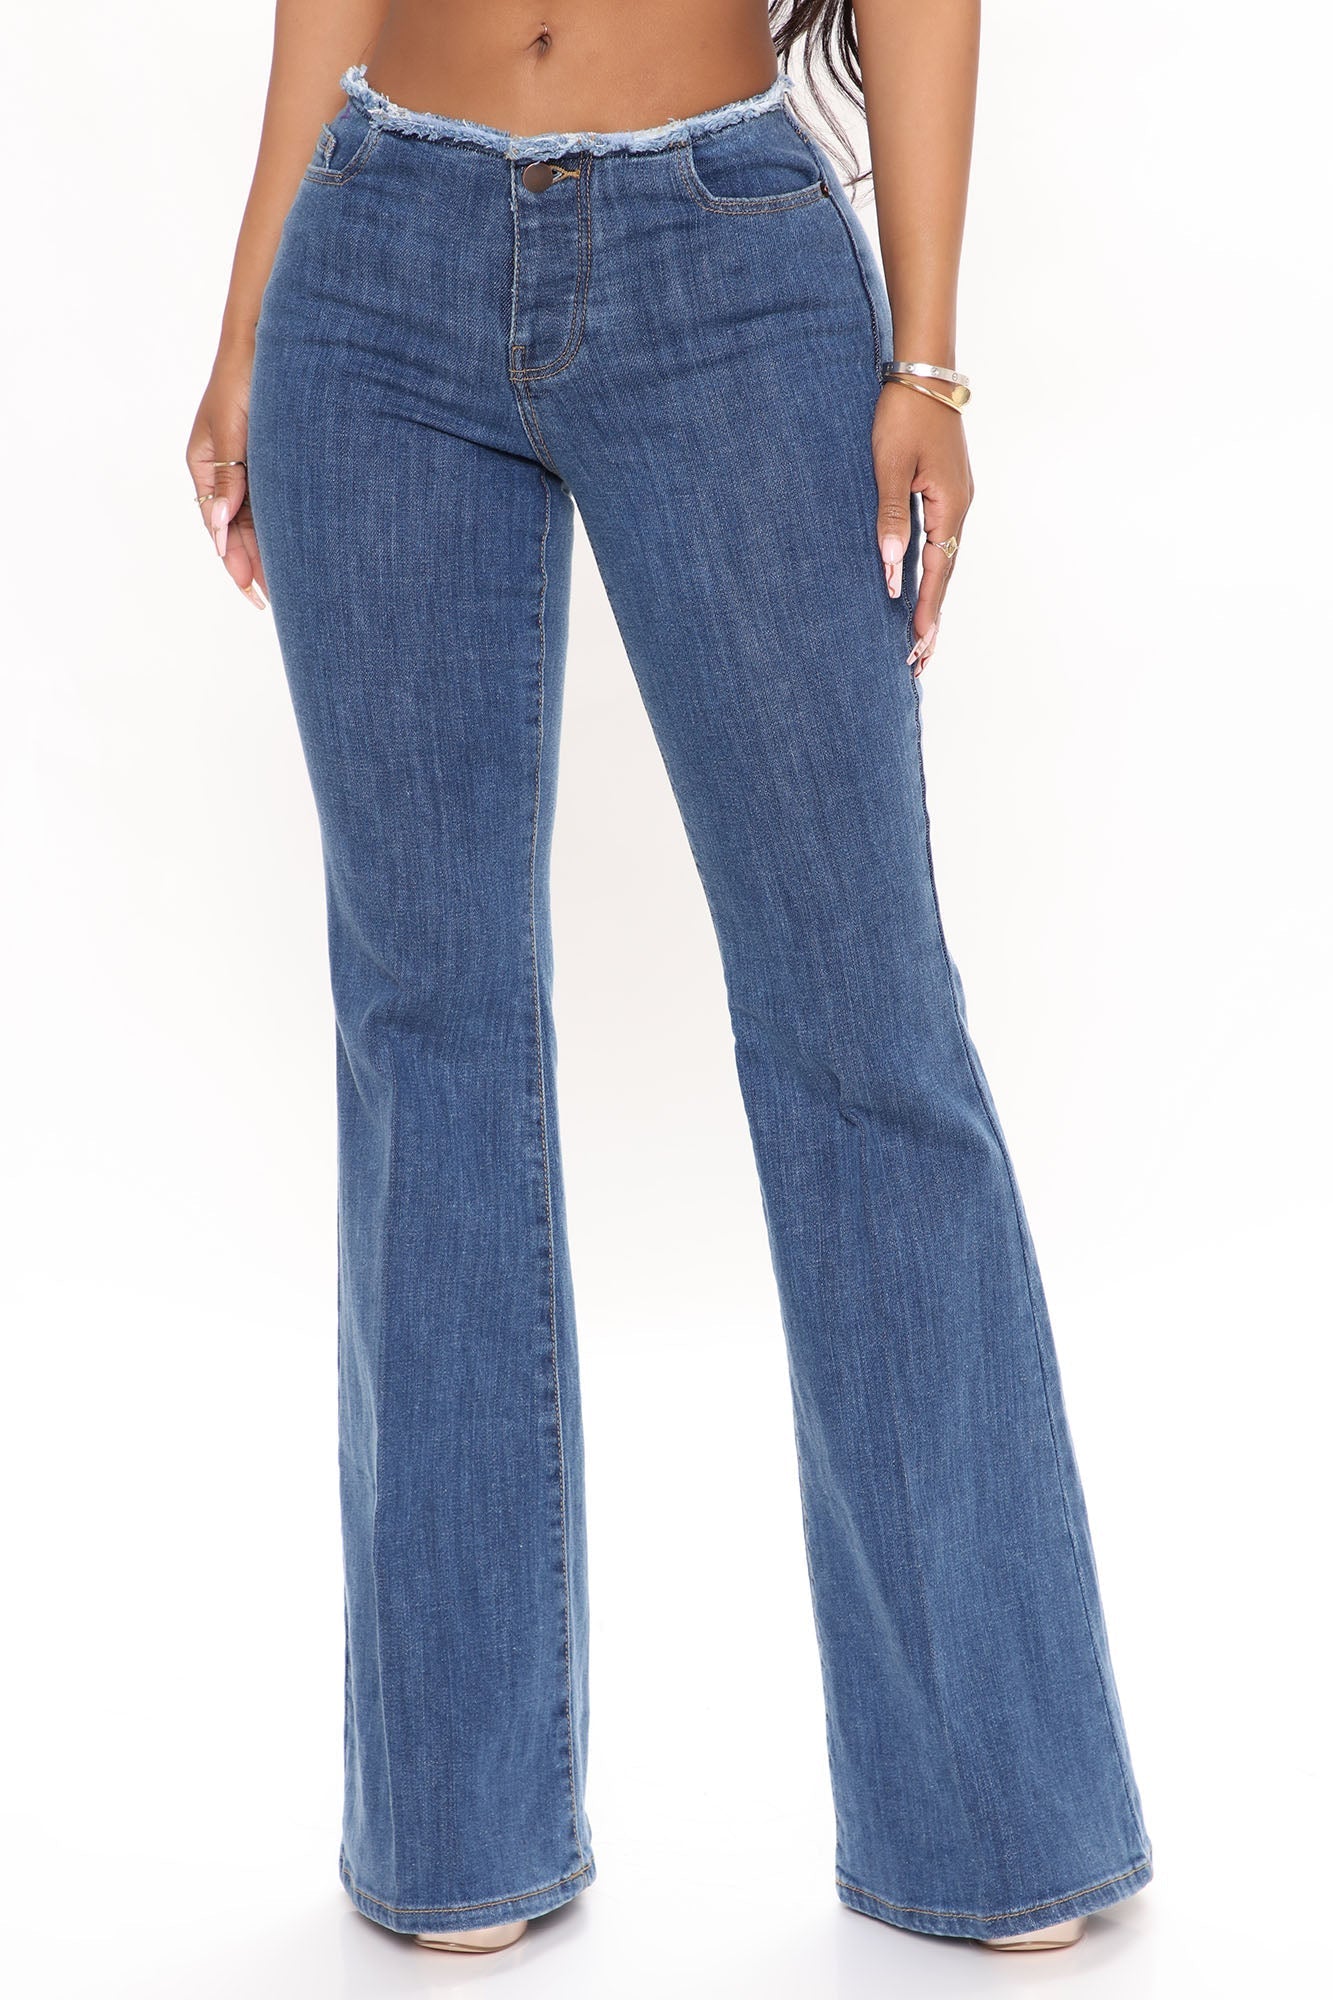 After All These Years Low Rise Flare Jeans - Medium Blue Wash